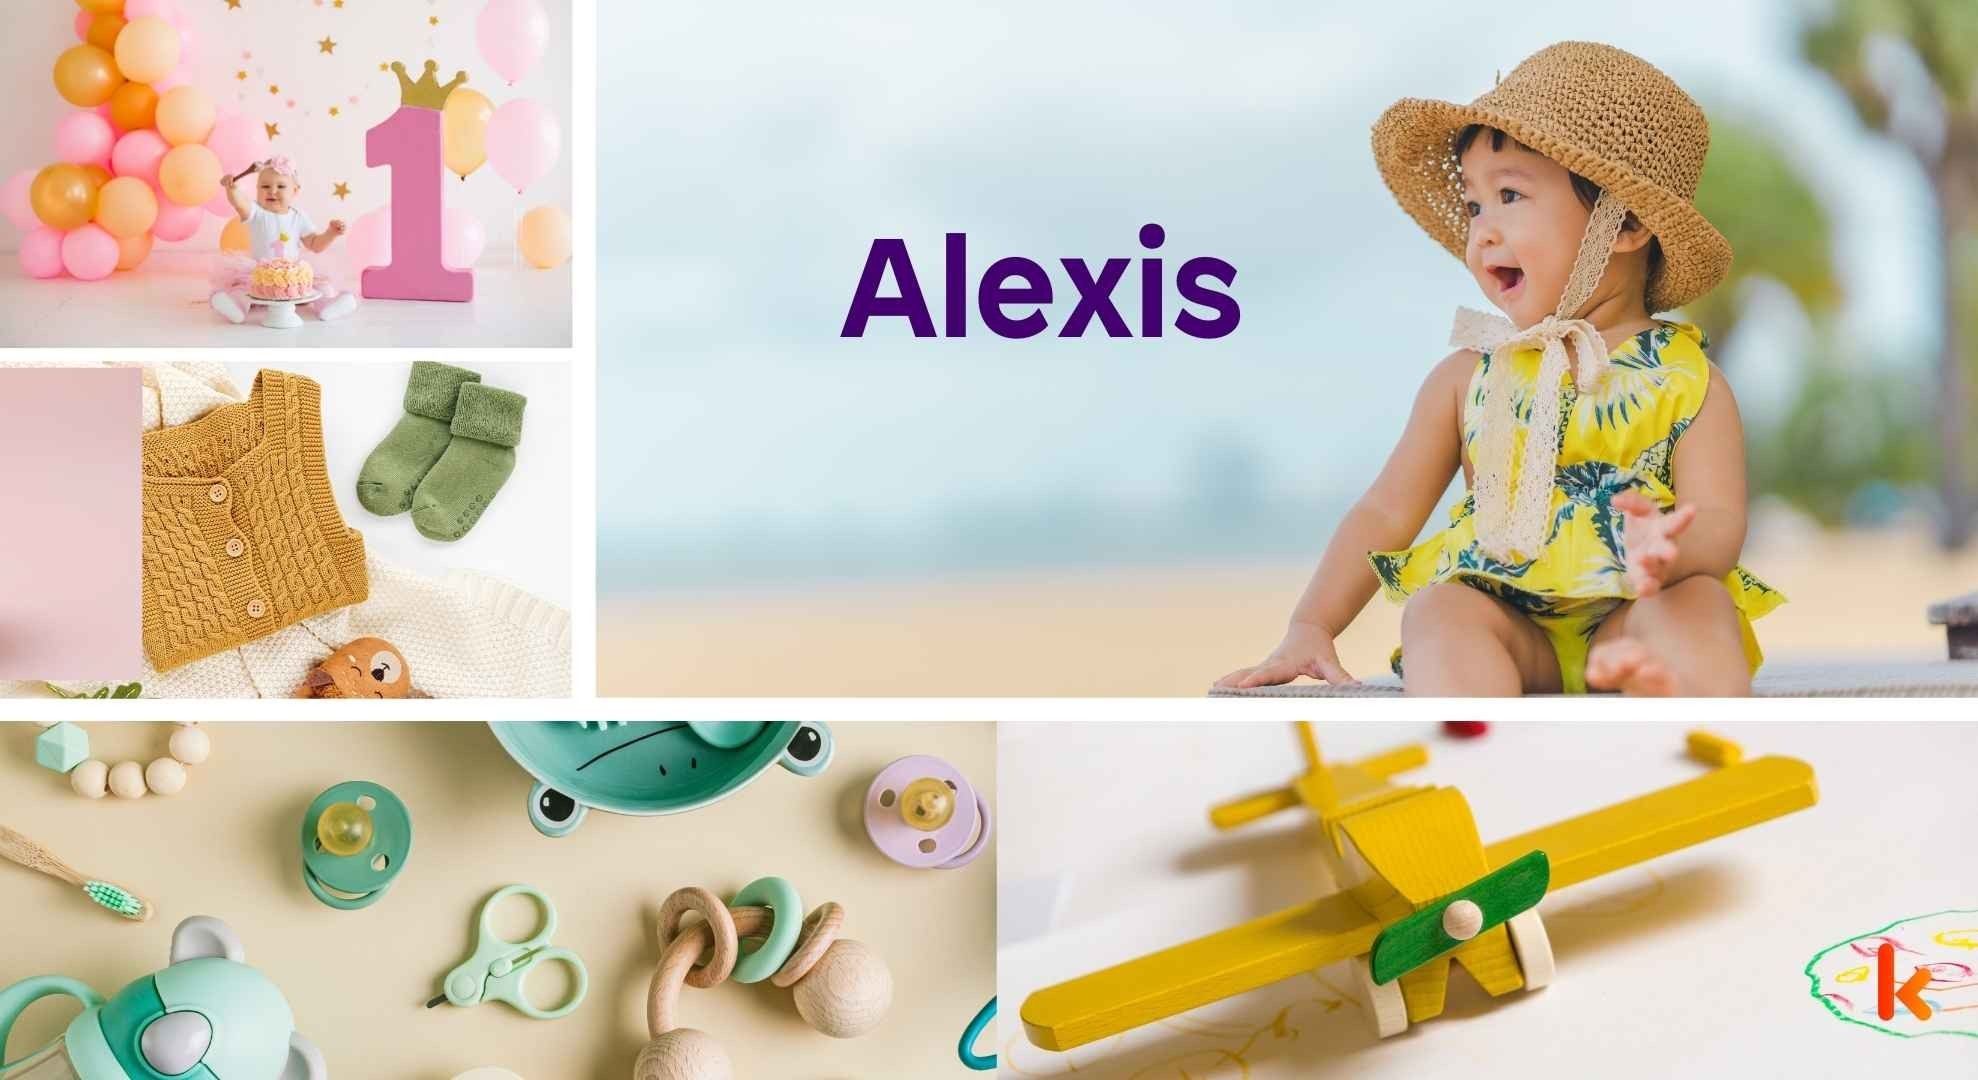 Baby name Alexis - Cute baby in hat, balloons, clothes, toys, aeroplane